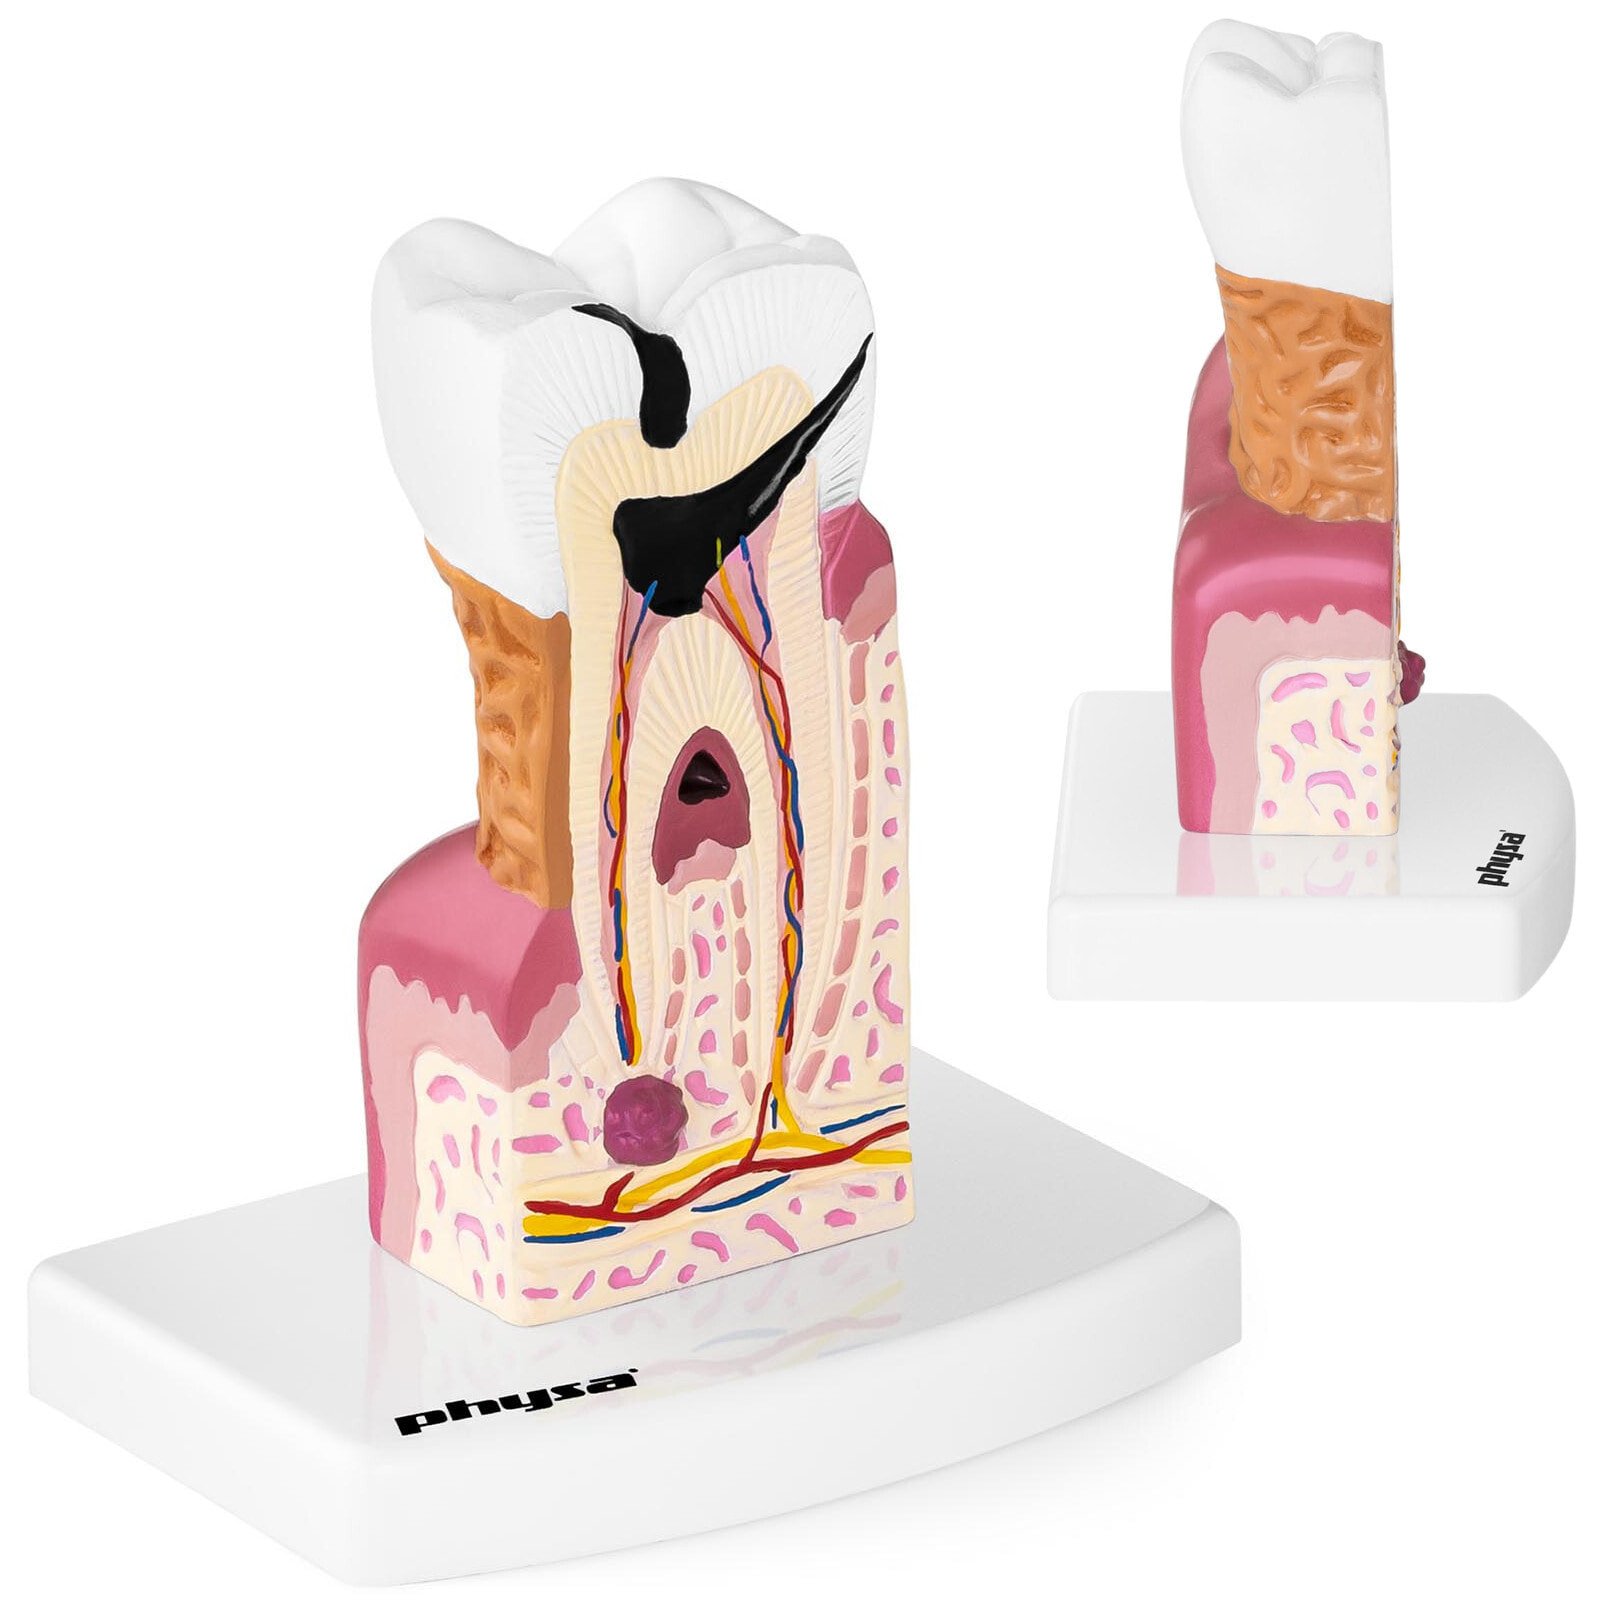 Anatomical model of a sick human tooth on a scale of 6: 1